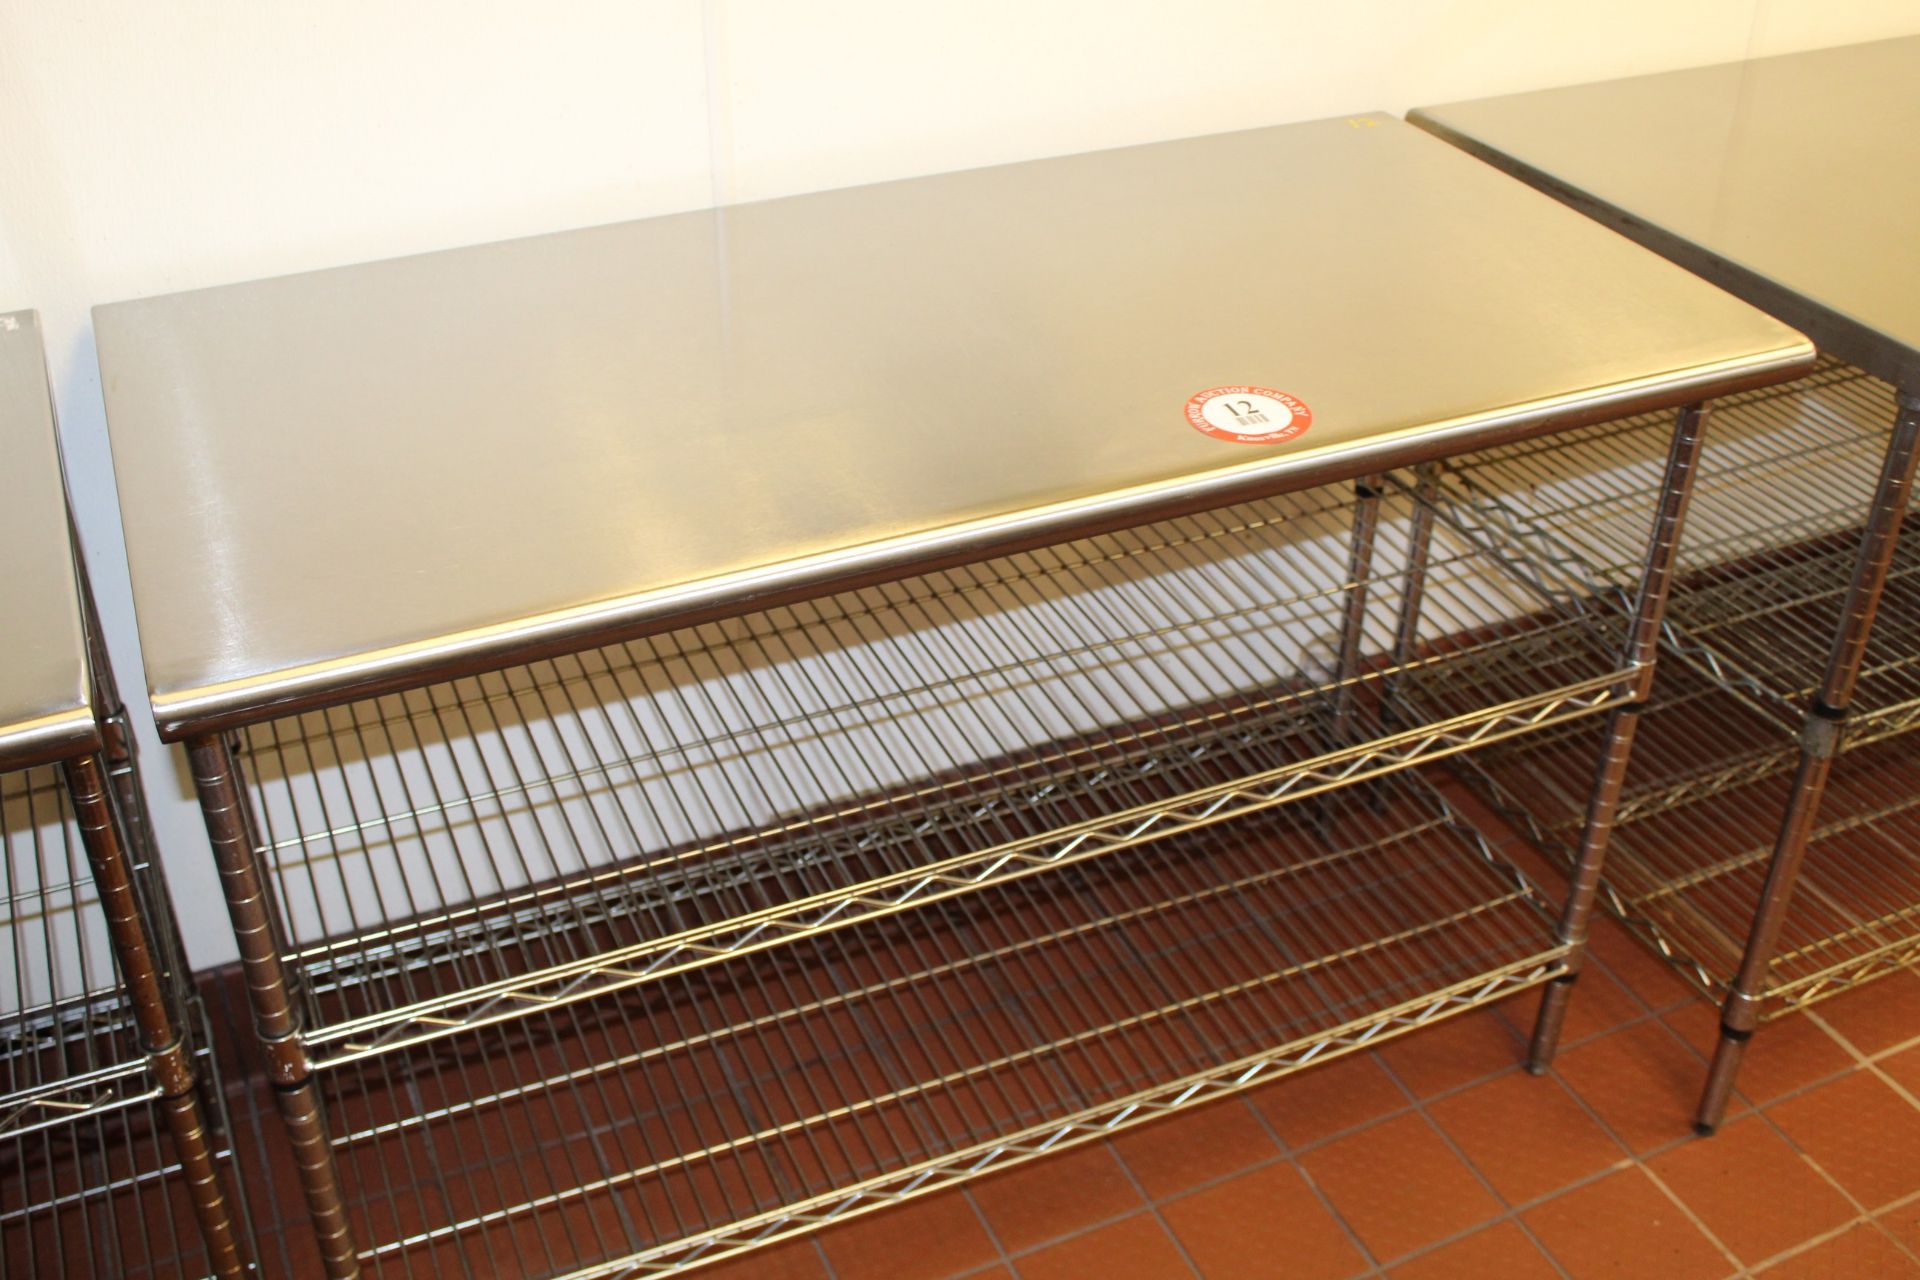 Stainless Steel Table w/ Adjustable Shelves, 24" x 48"